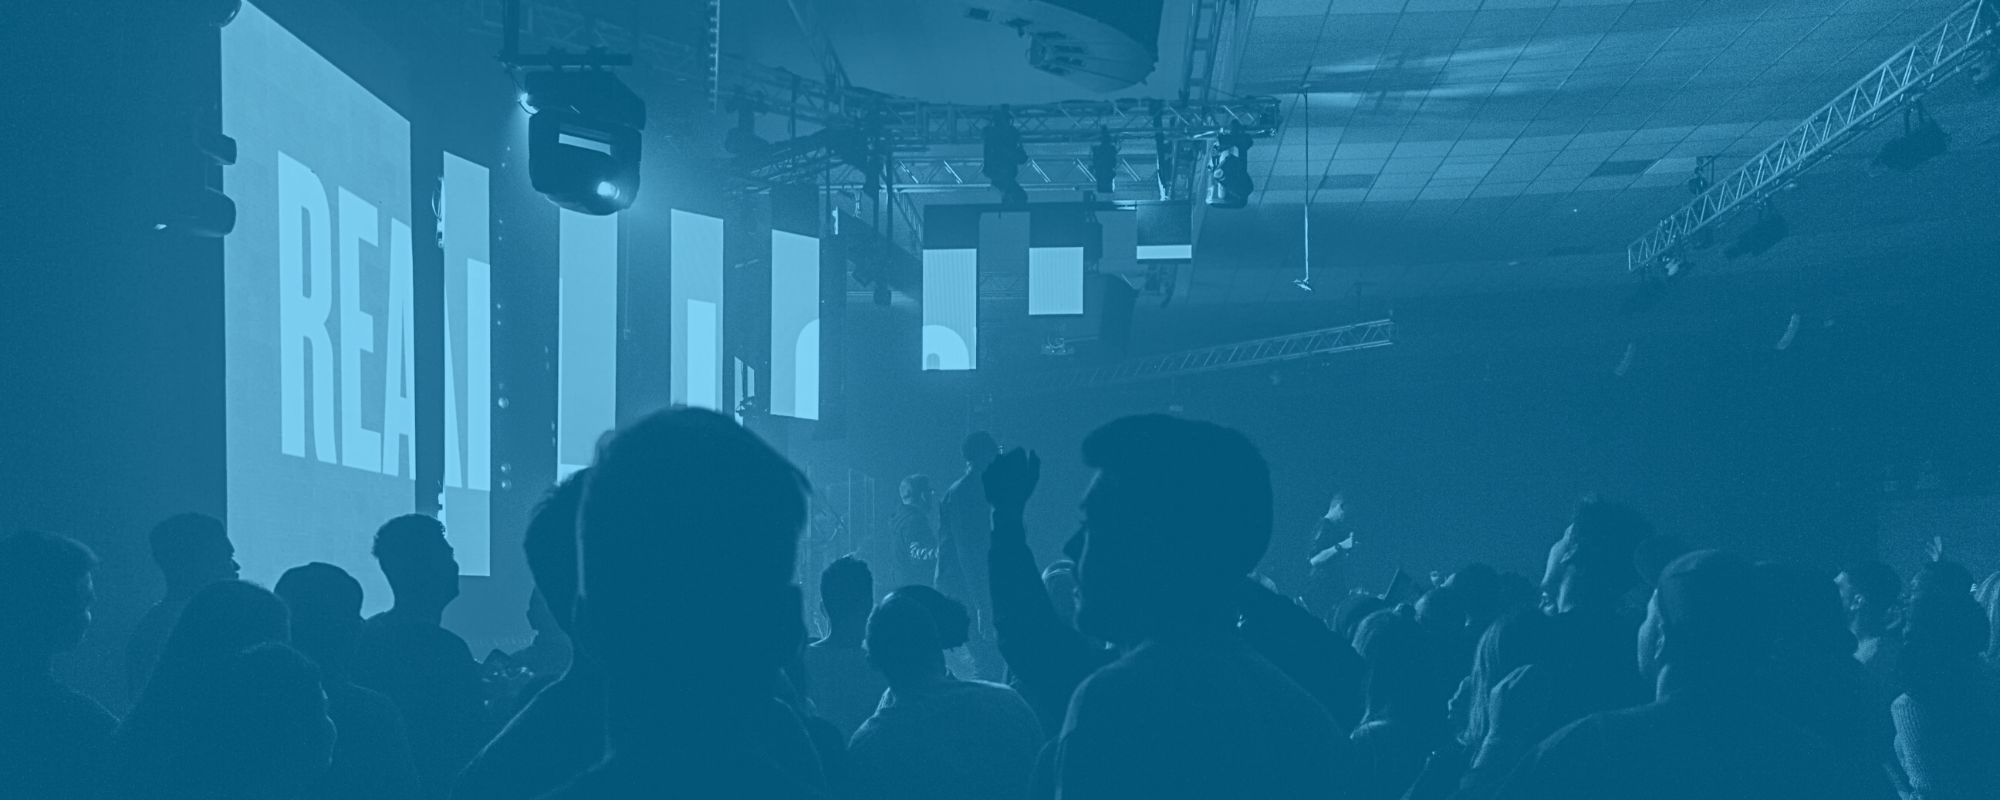 The Future of Events and Event Industry Trends: What’s Next?